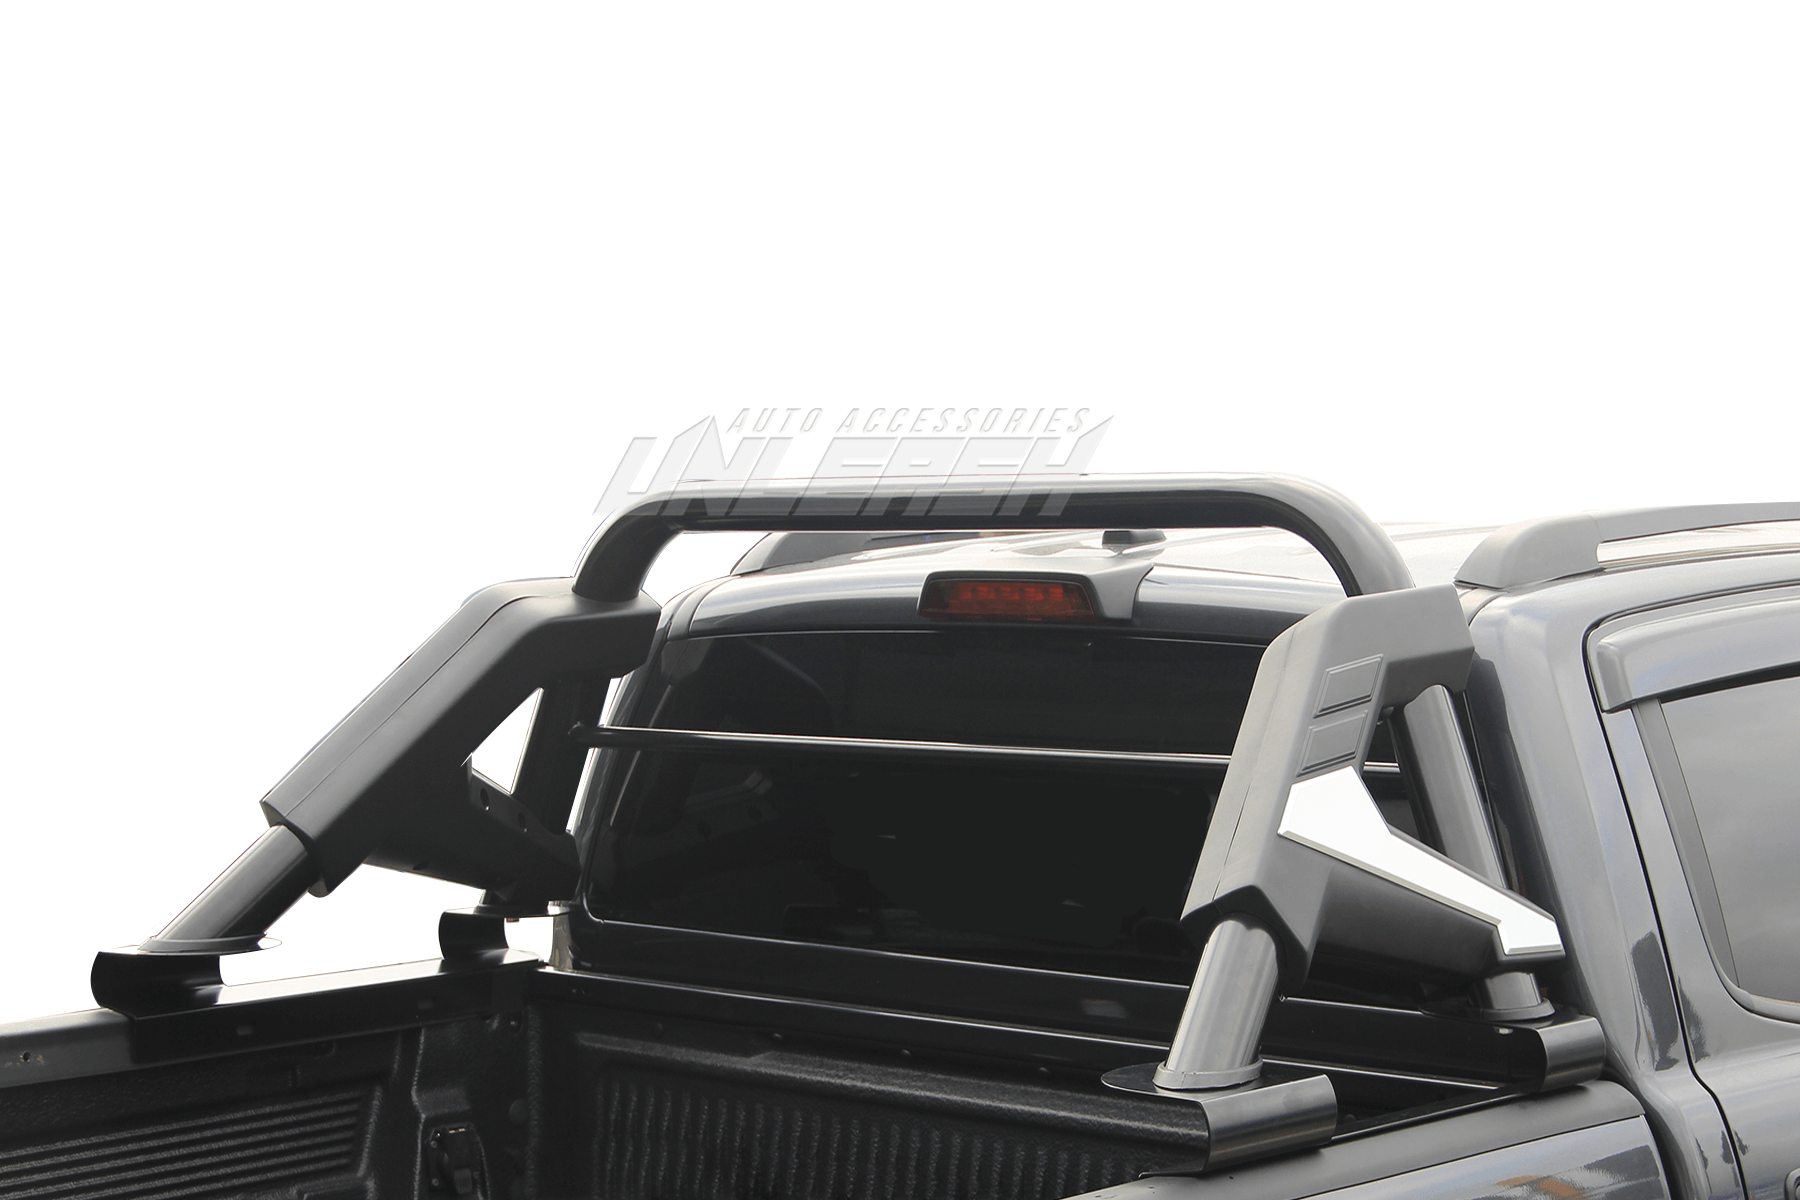 Matte Black Stainless Steel Roll Bar for Toyota Hilux 2015-current - Prolink Performance